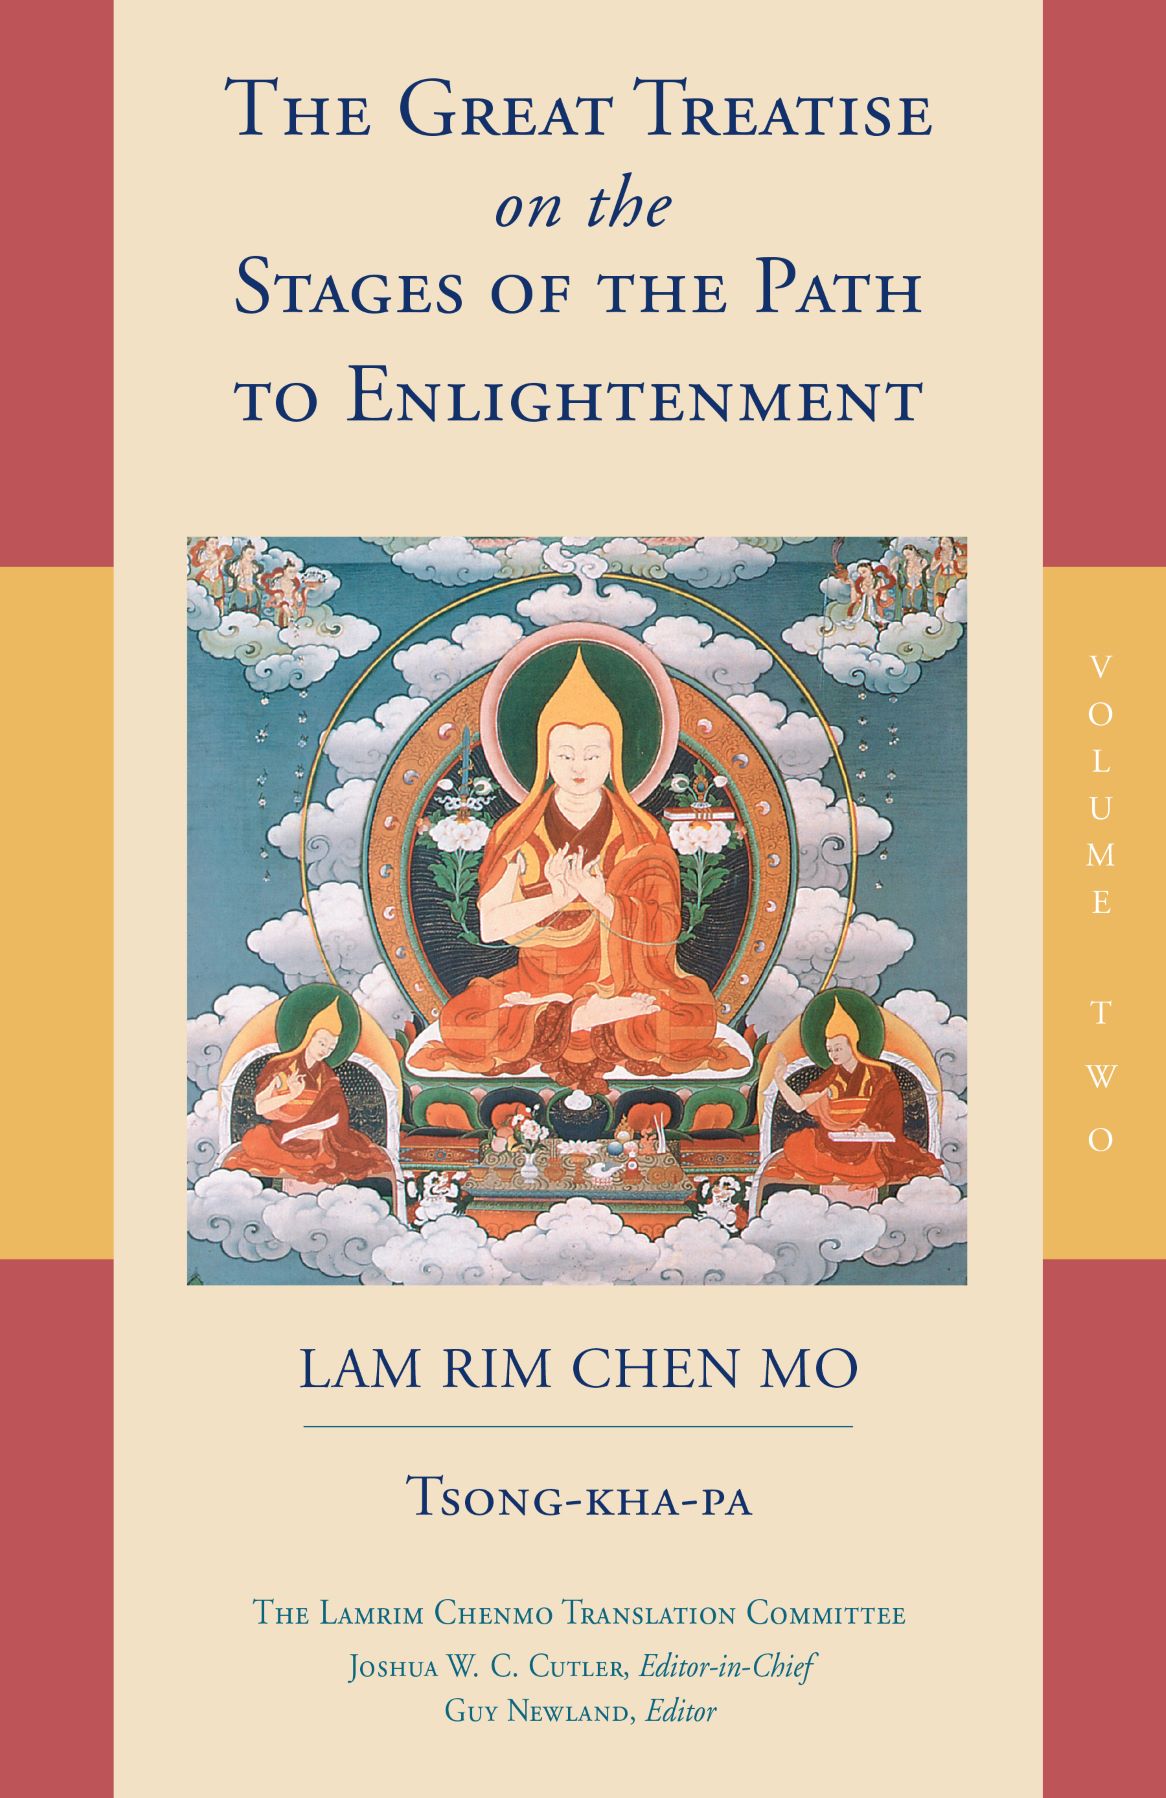 The Great Treatise on the Stages of the Path to Enlightenment Volume 3